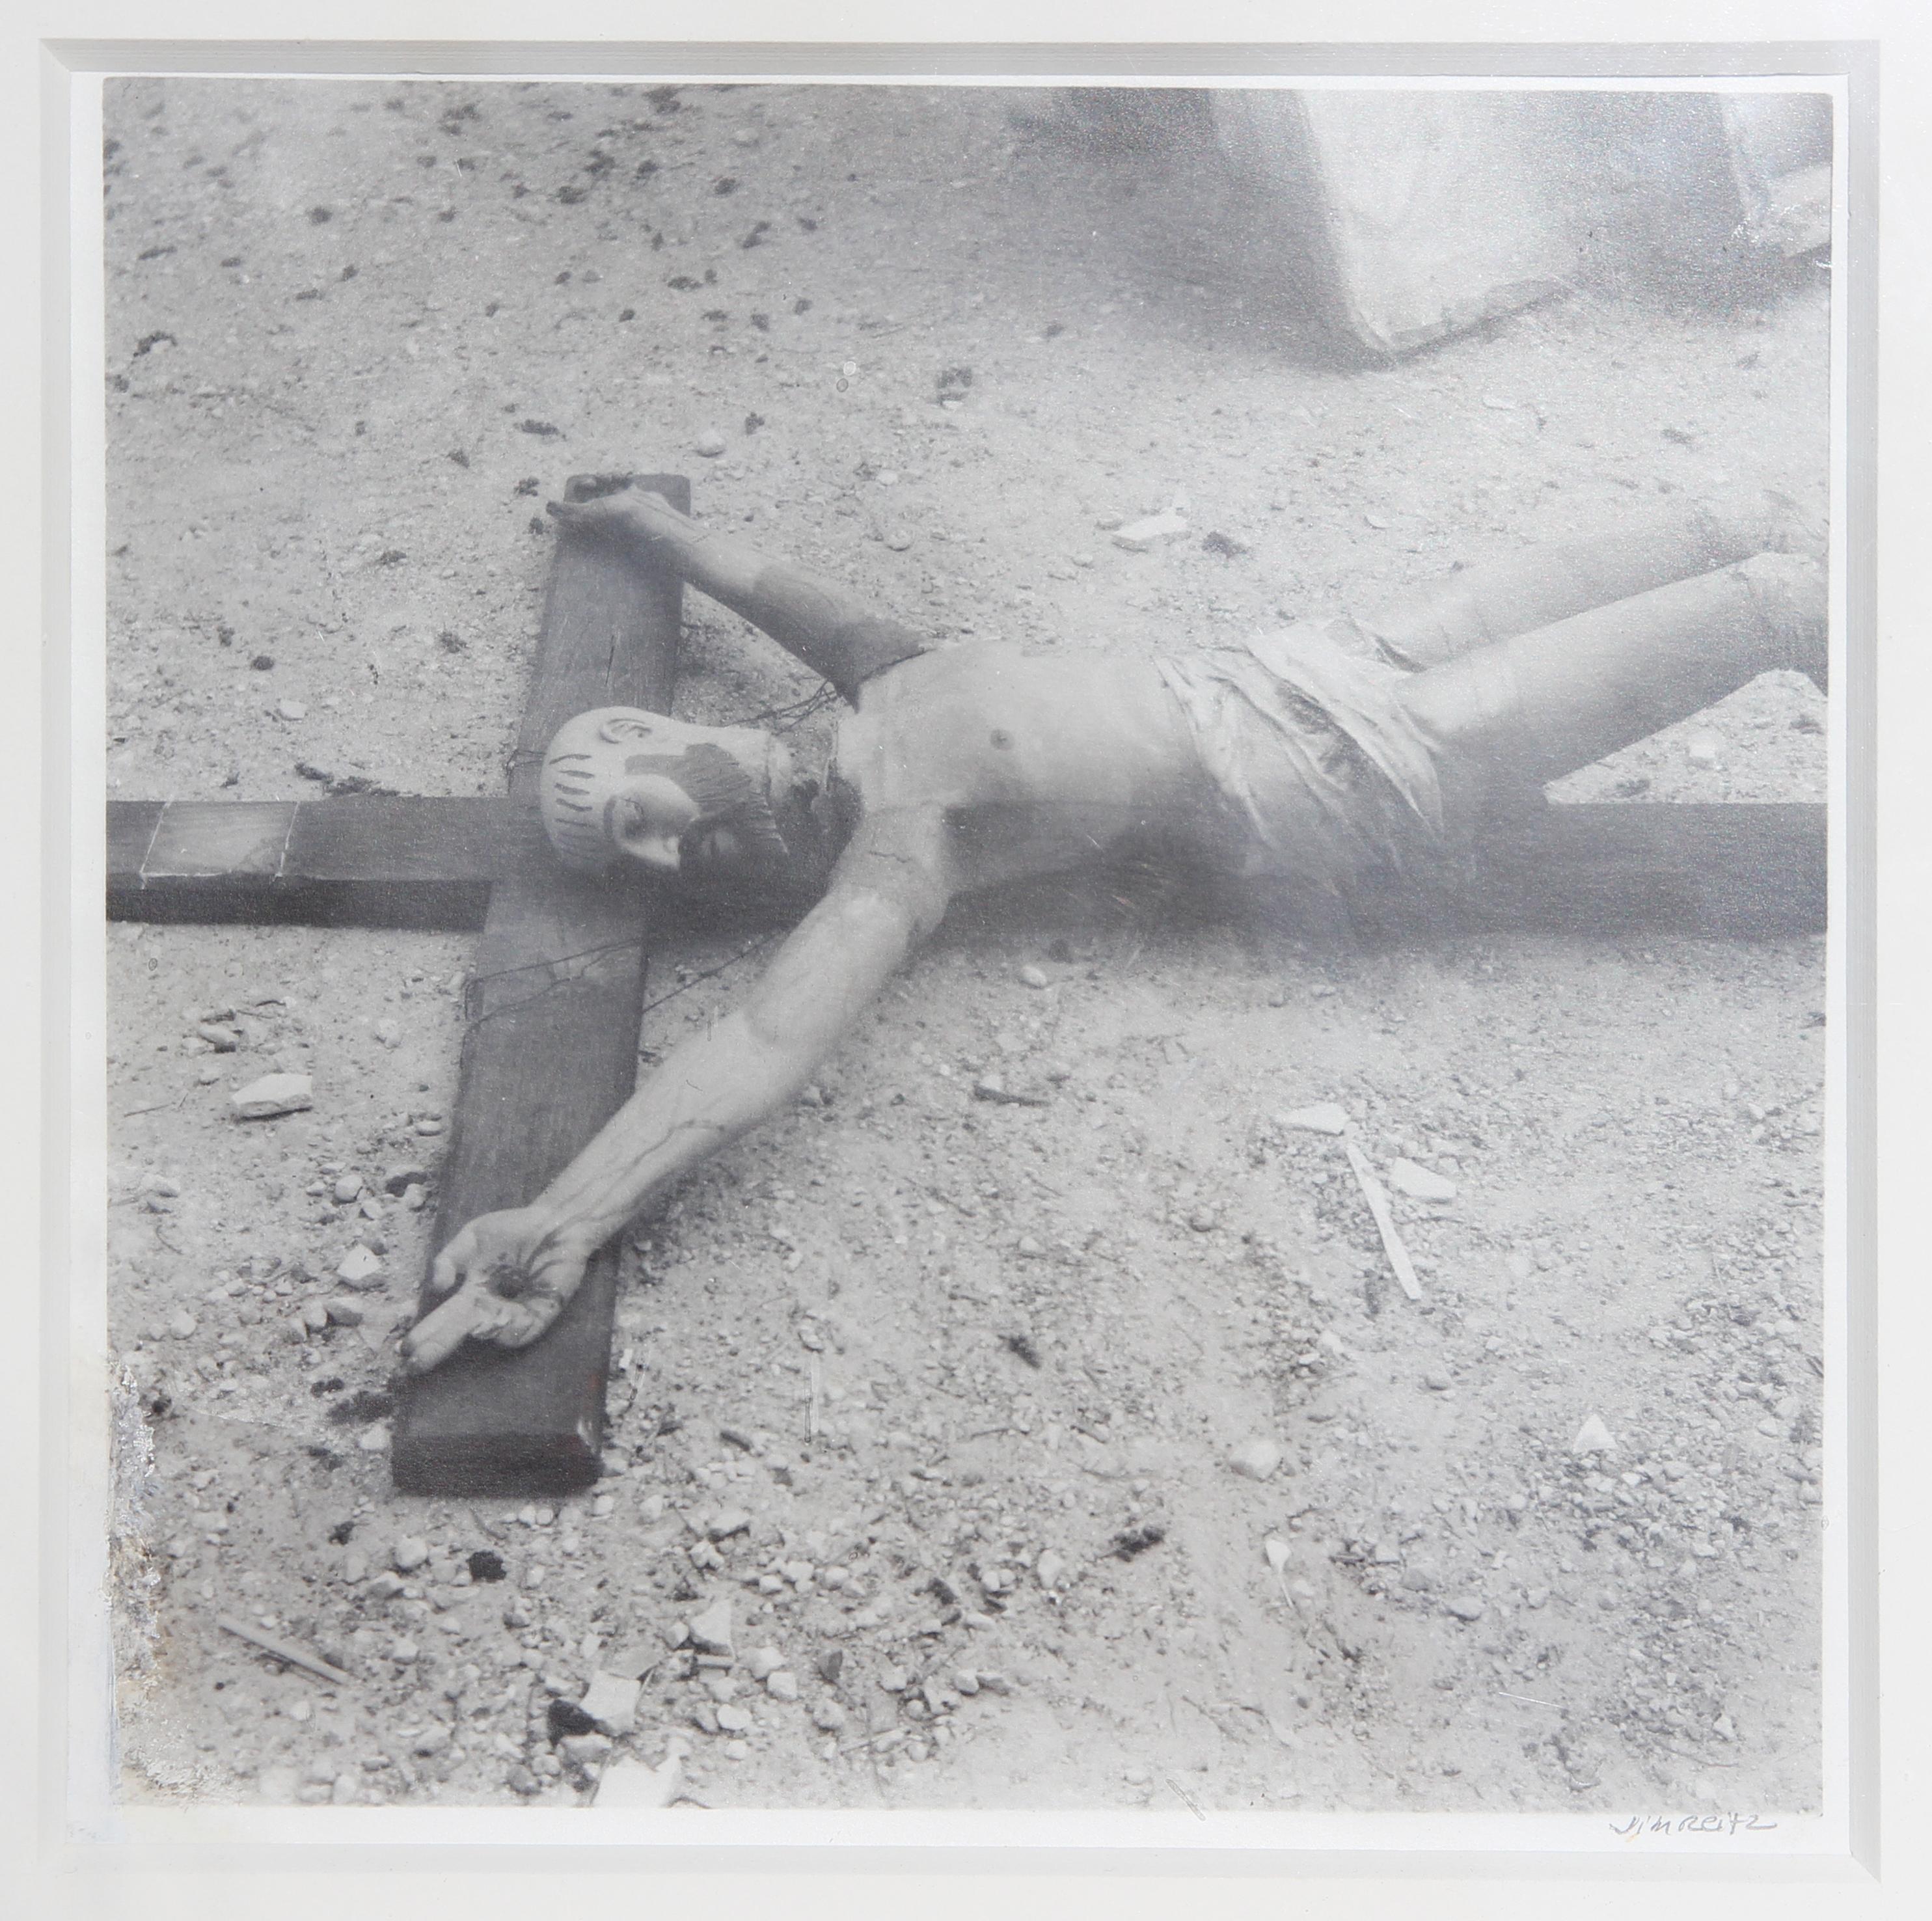 Black and White Photograph of a Found Crucifix Sculpture on the Ground - Gray Still-Life Photograph by Jim Reitz